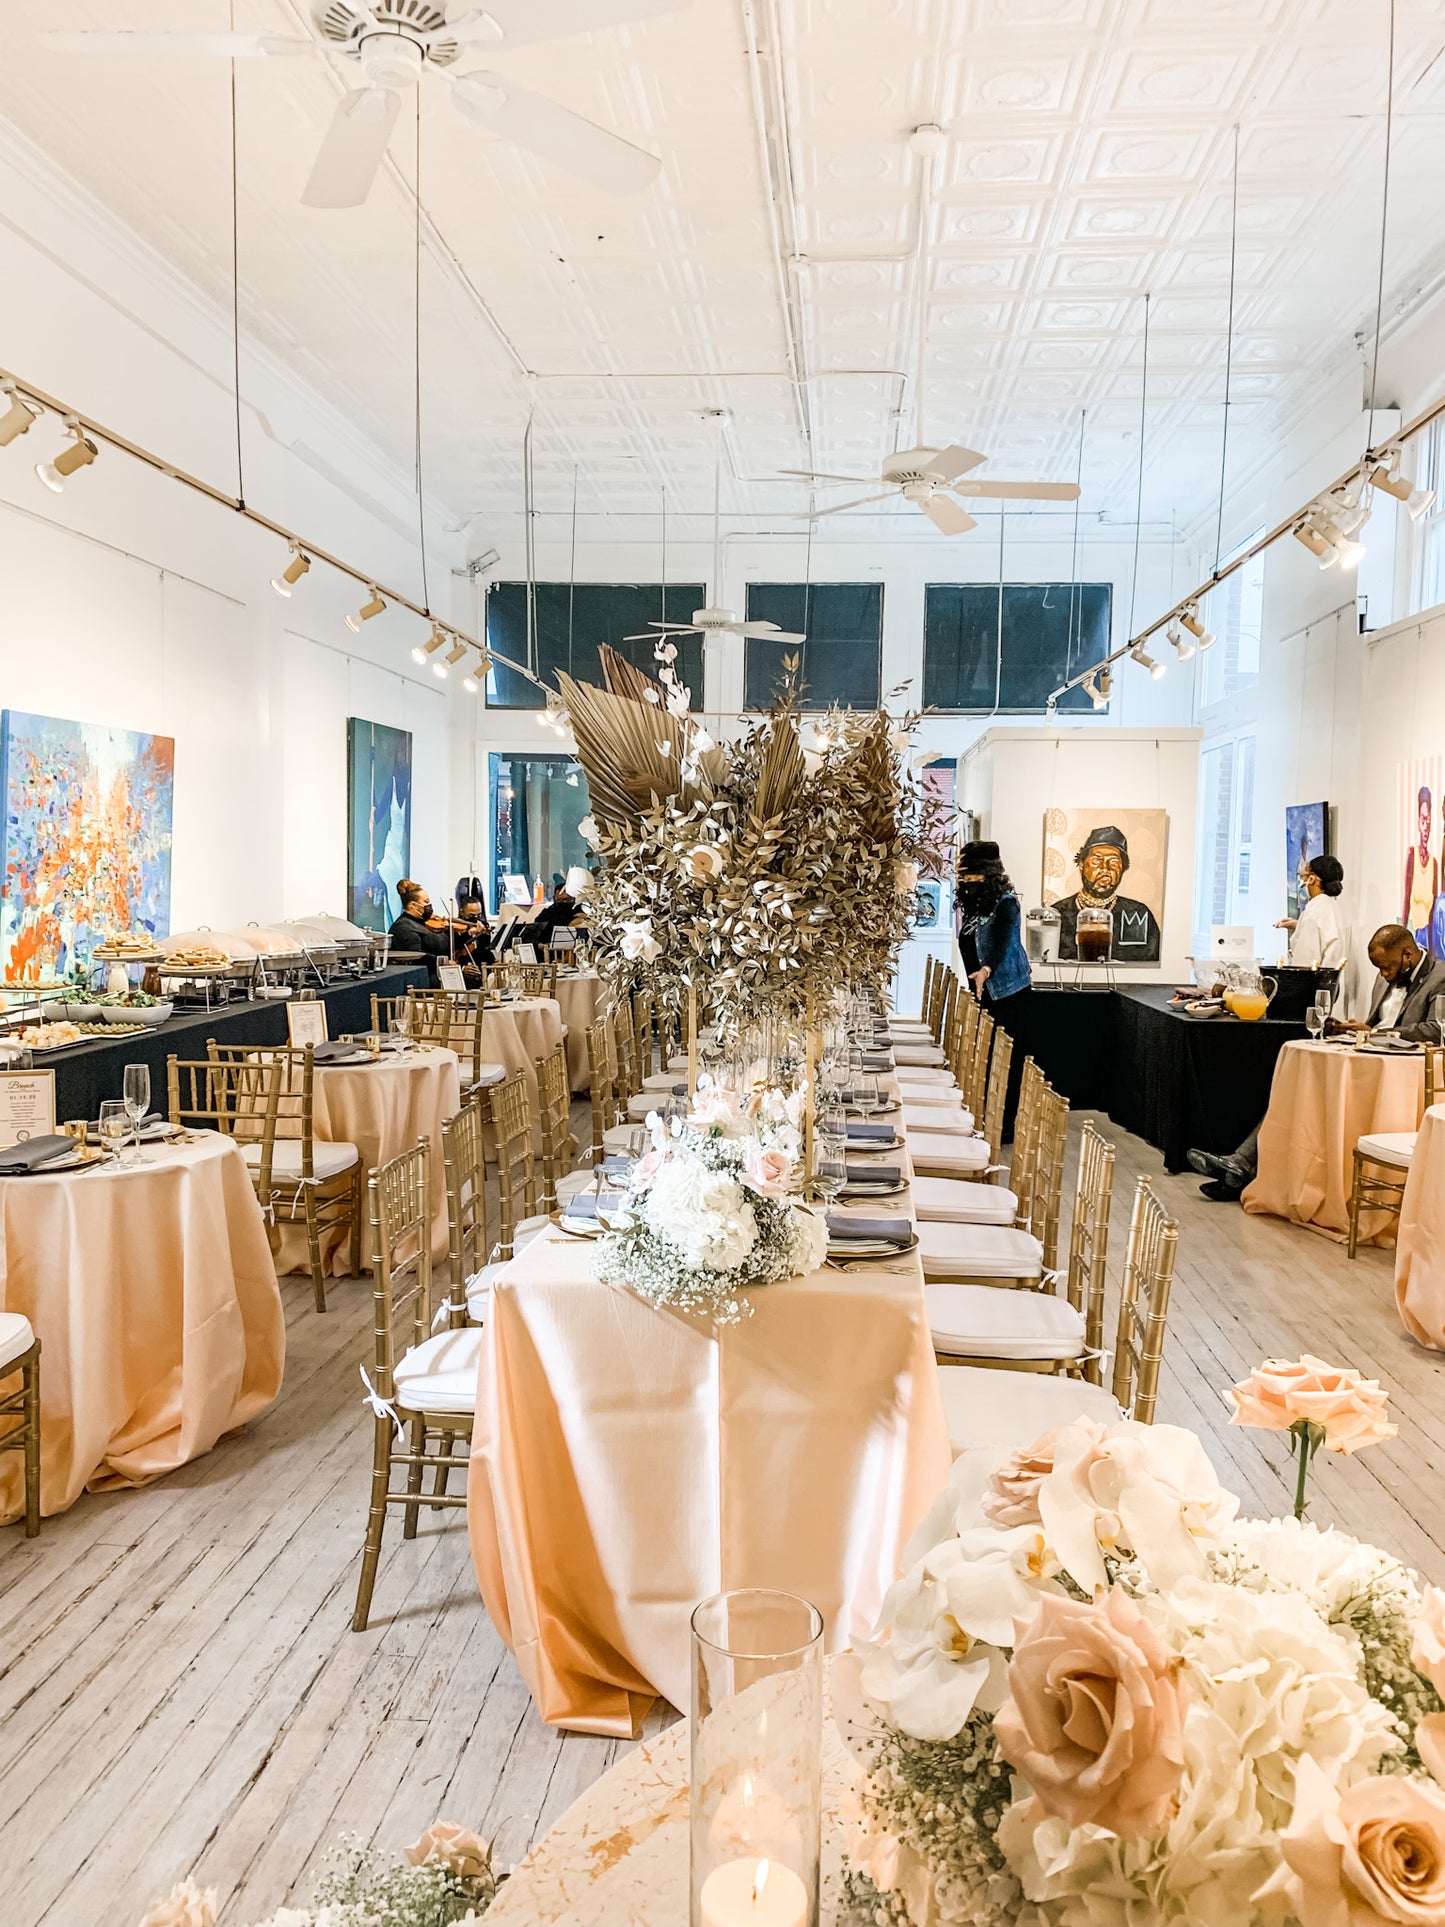 Host Your Event at the Gallery (Friday or Saturday)